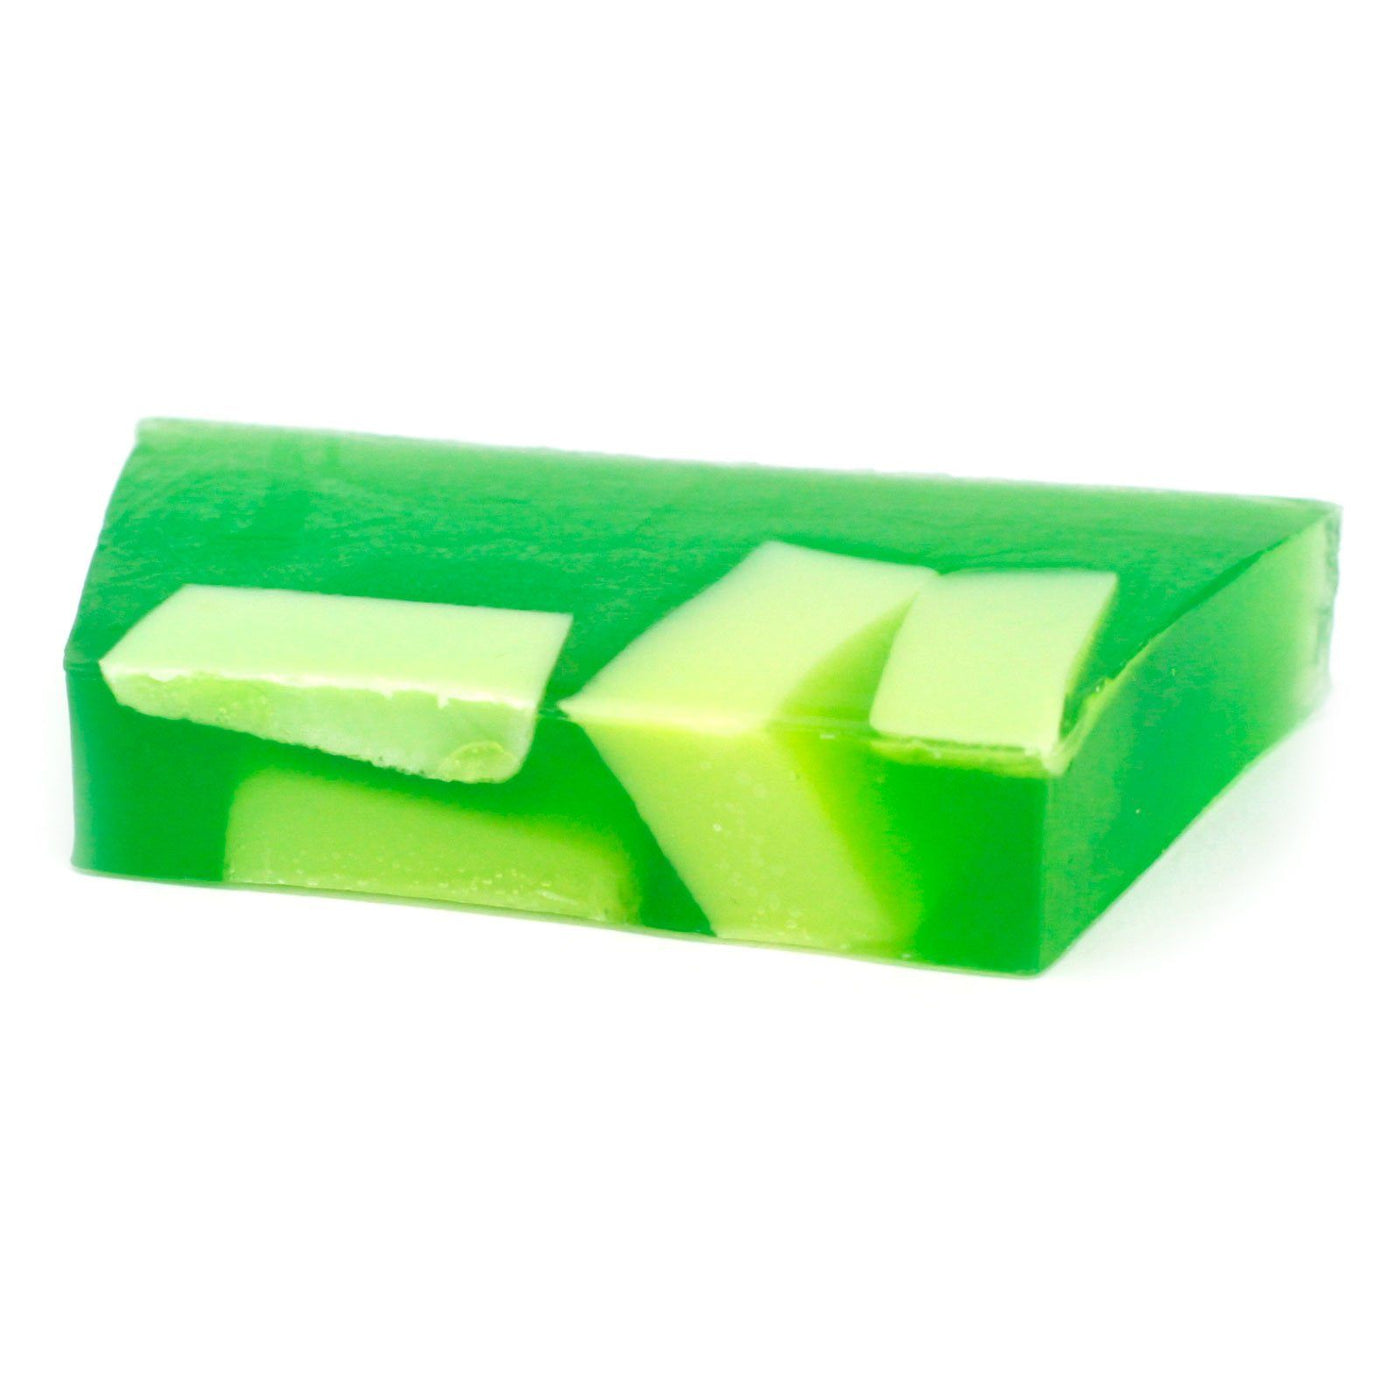 Lovely Melon Body Soap Loaf And Slices.